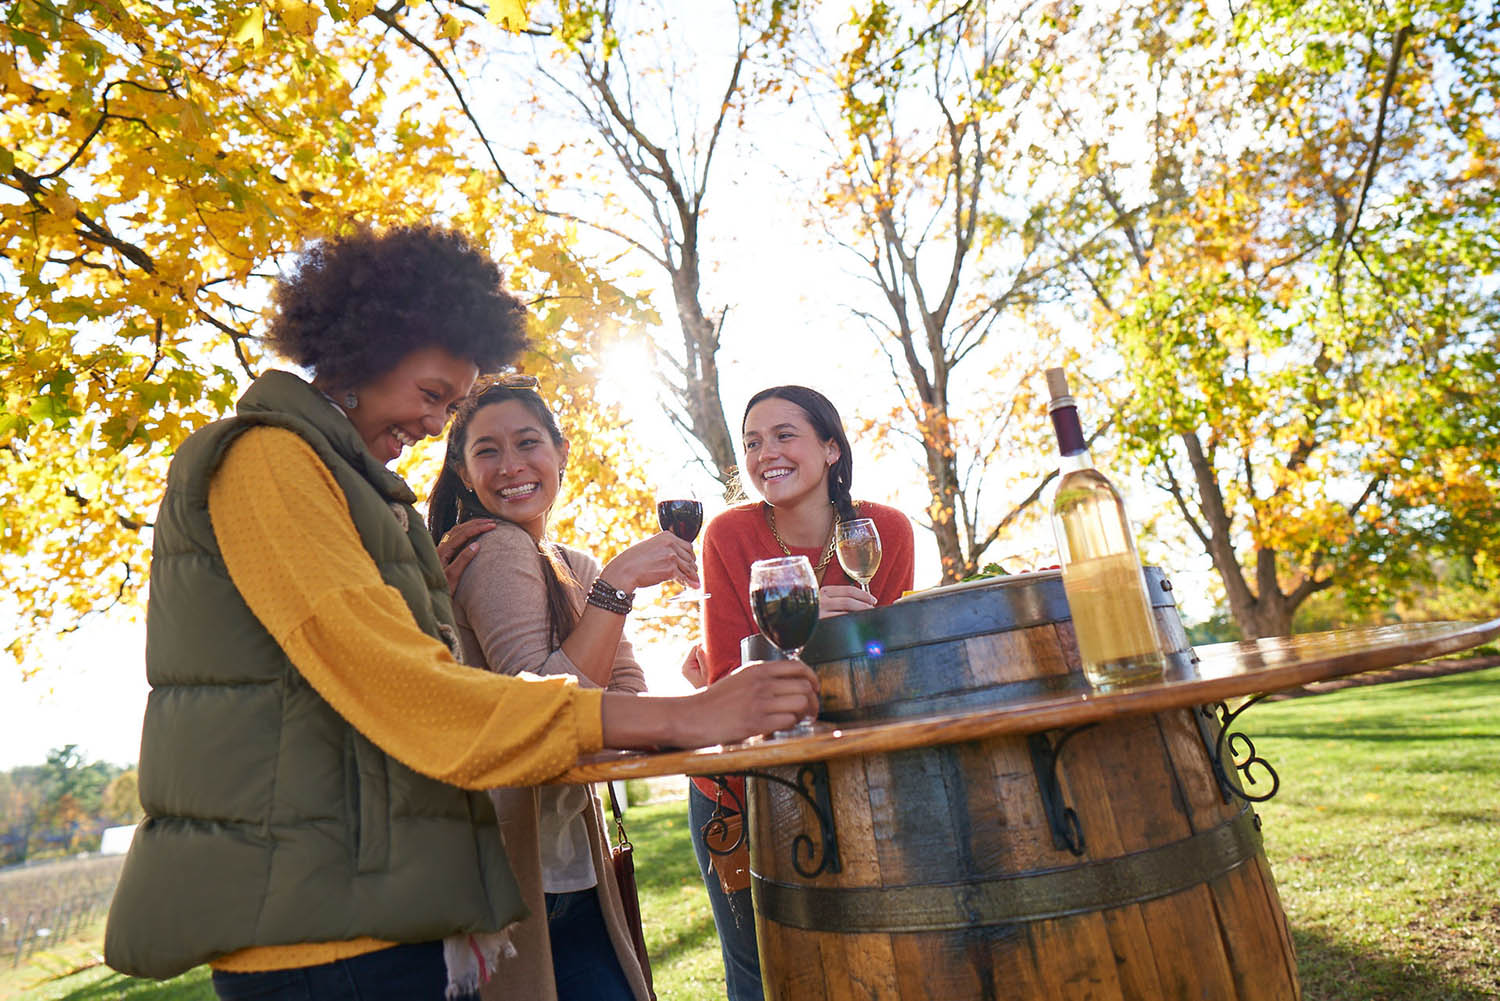 Woman outdoors gathered around a table wine tasting